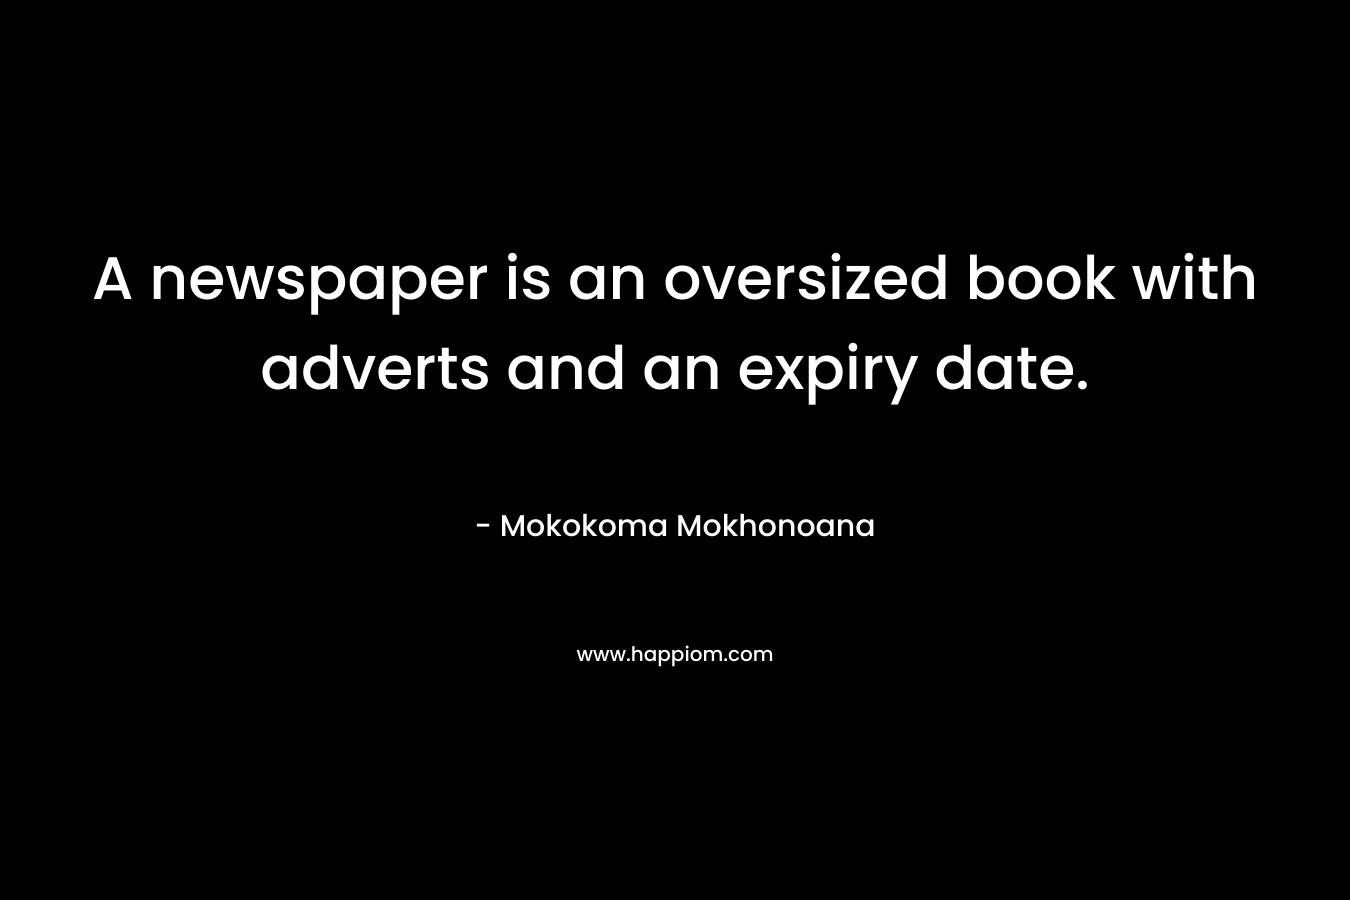 A newspaper is an oversized book with adverts and an expiry date.